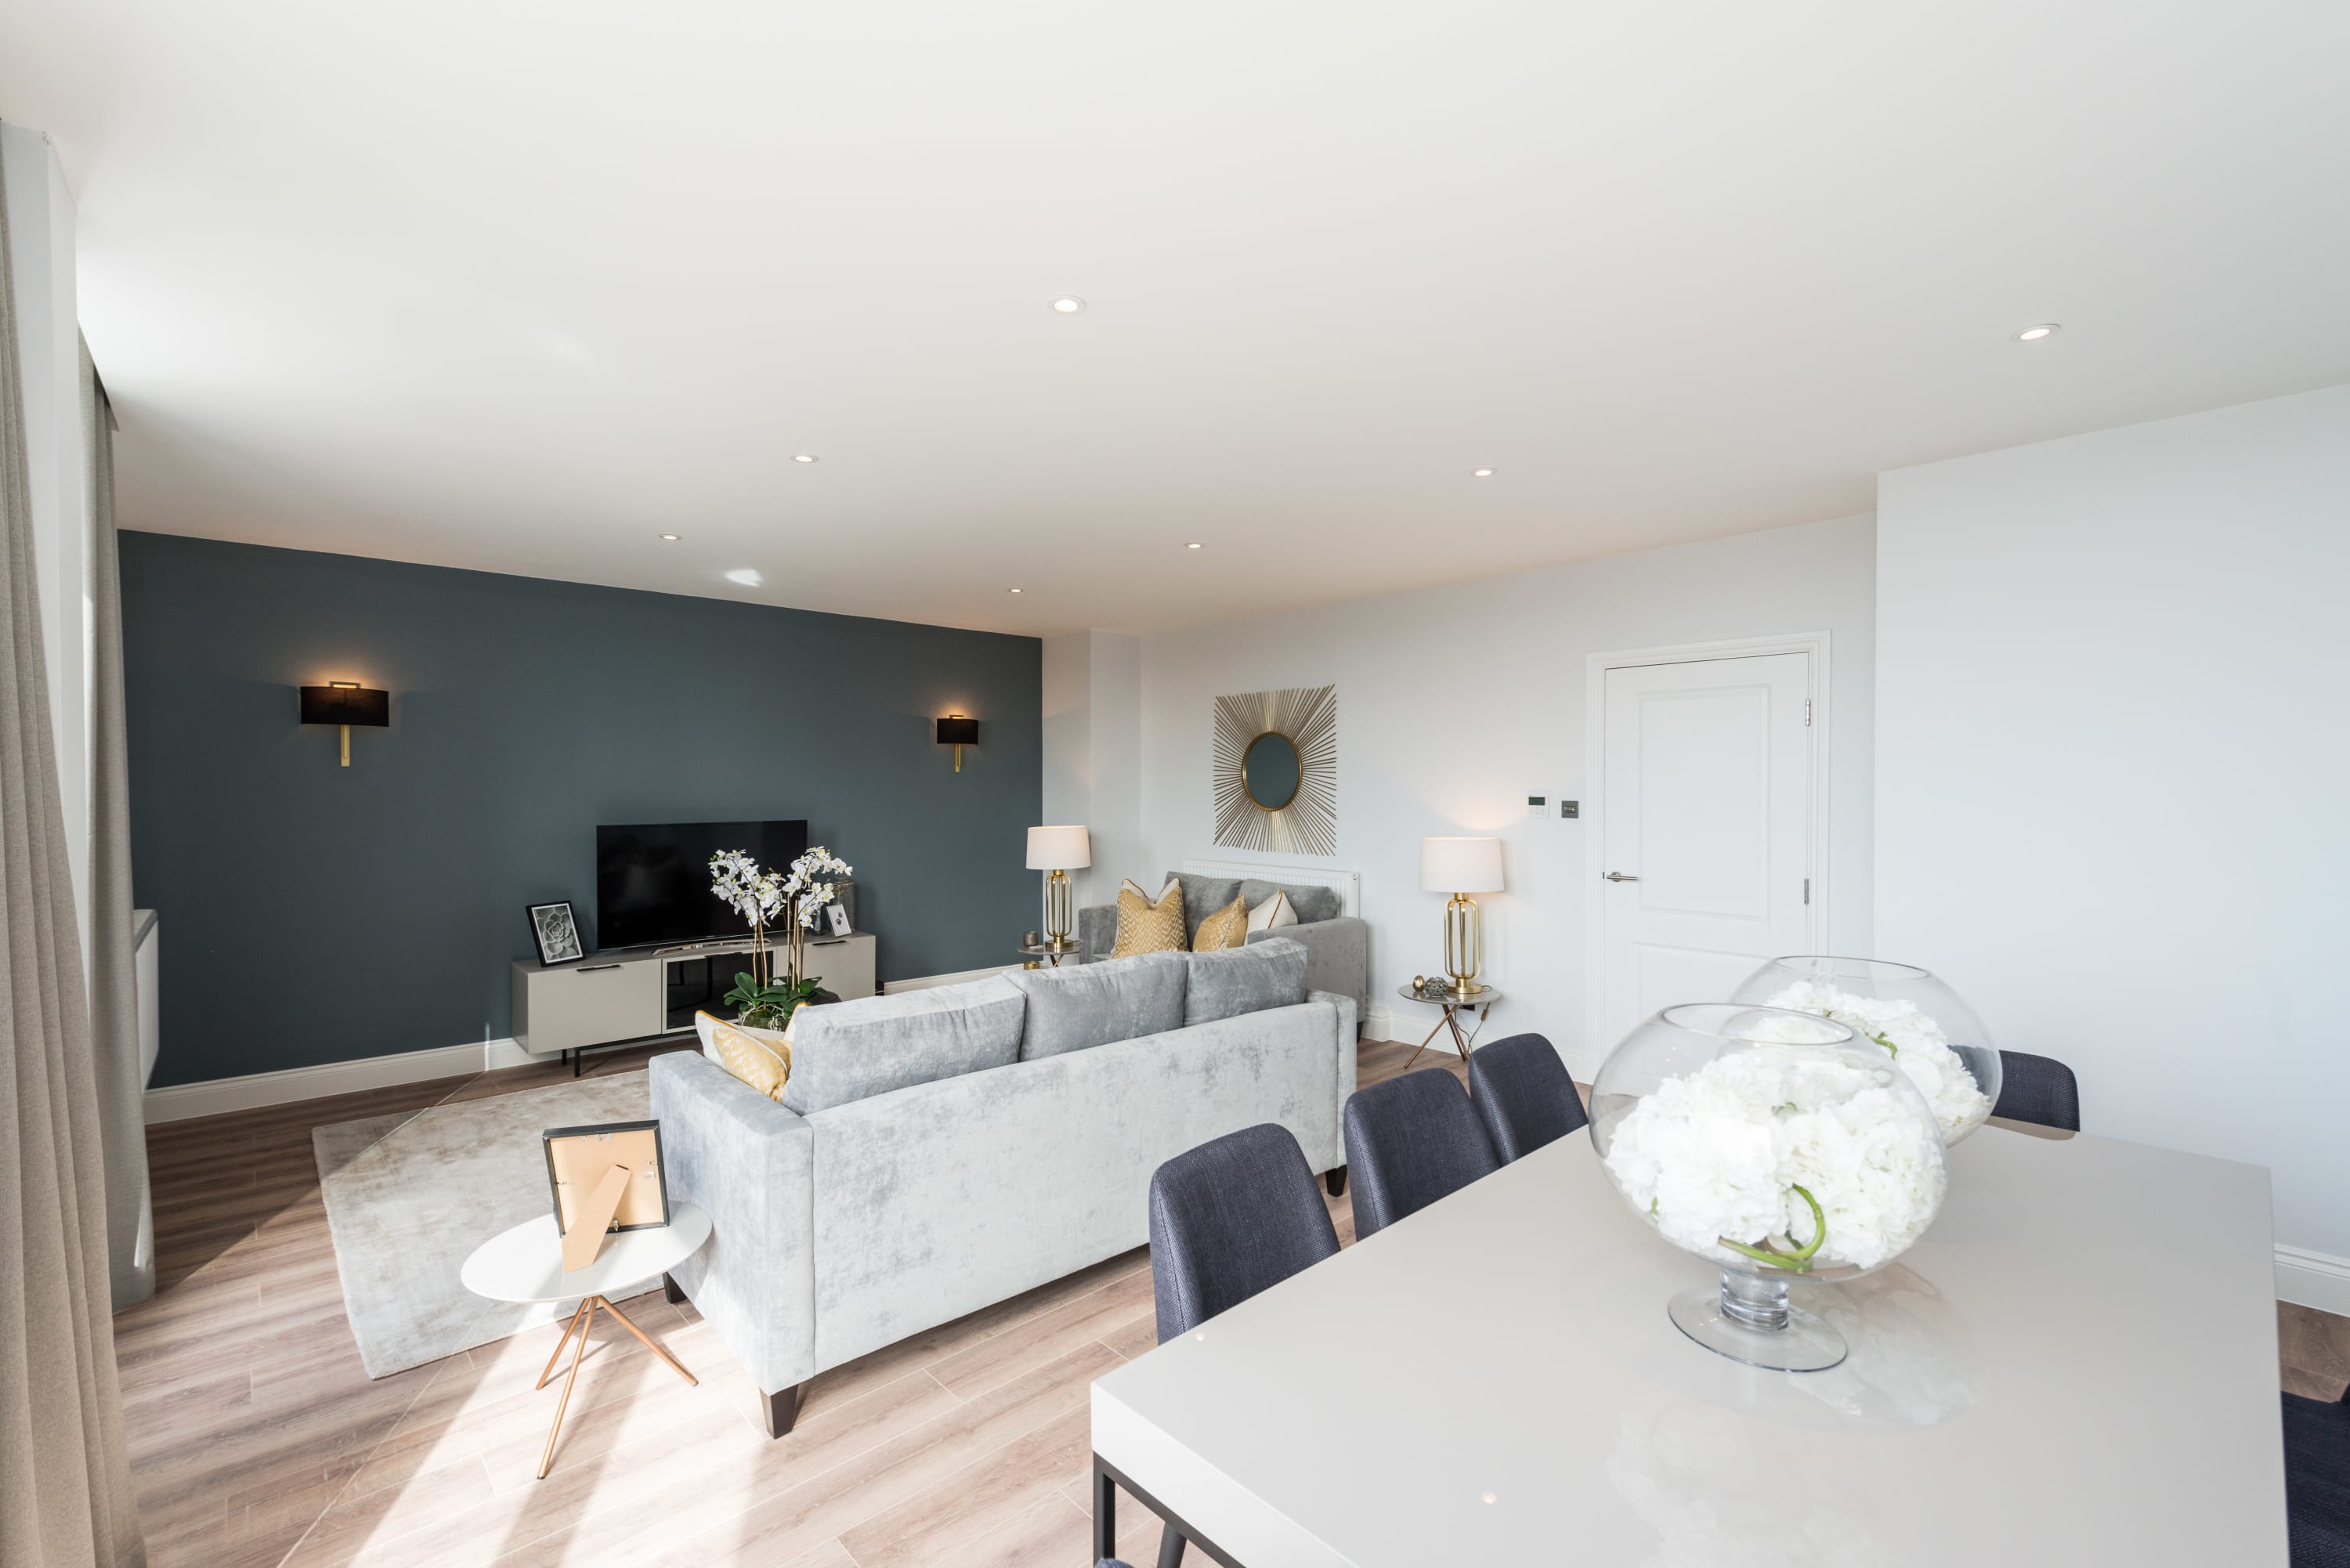 Property Image 2 - Stunning 4 Bedroom Duplex Apartment in Earls Court with Terrace